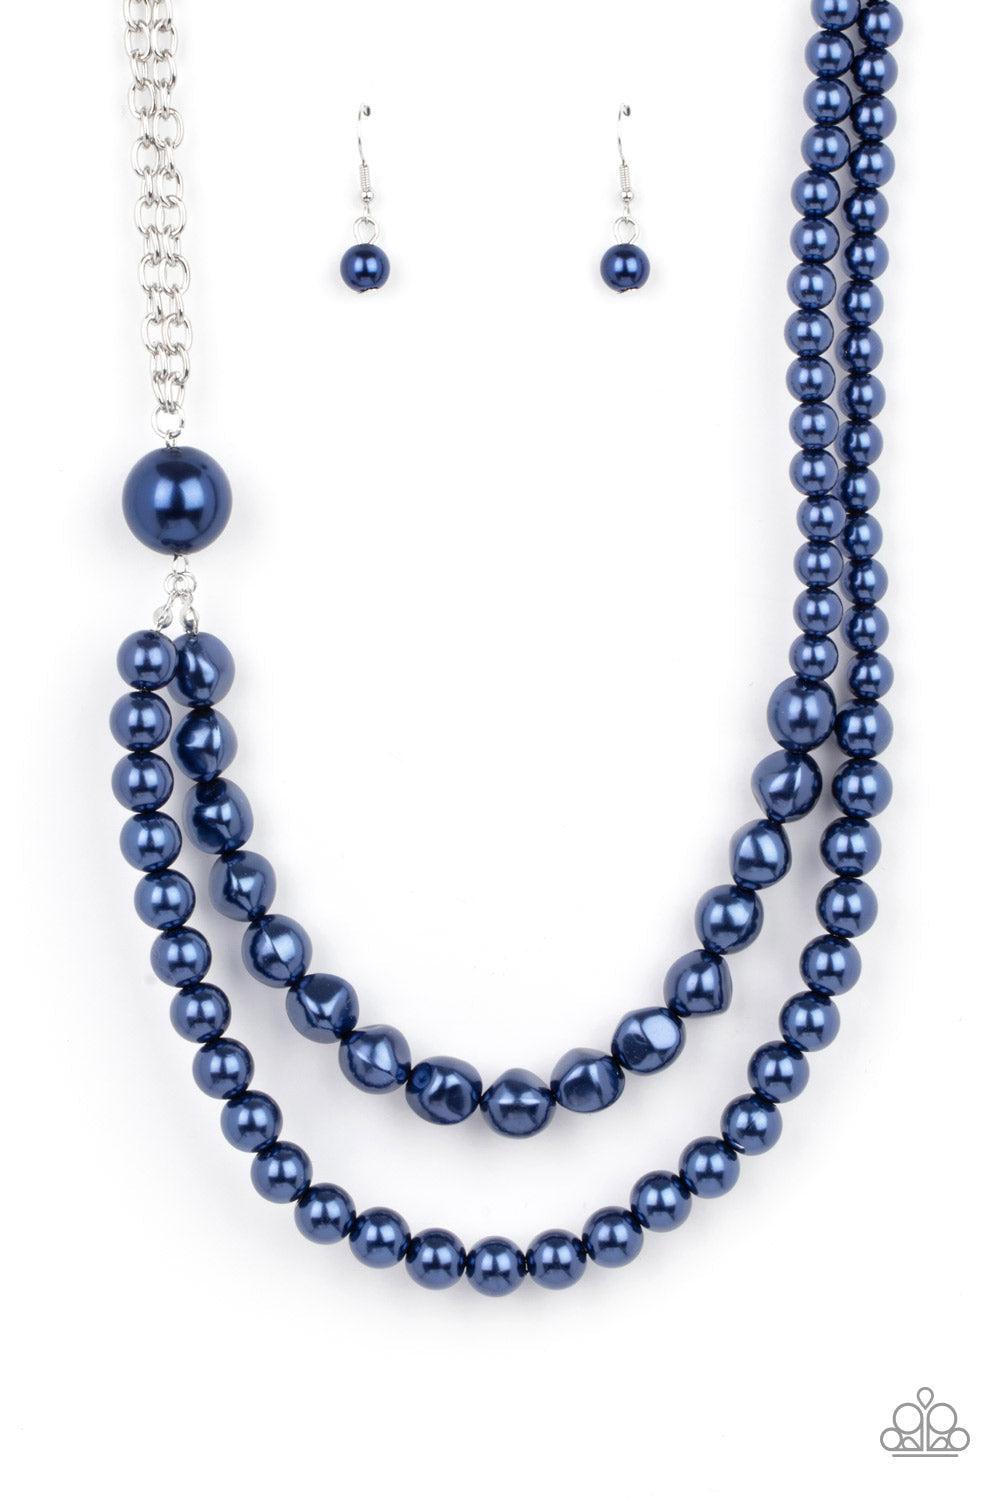 Remarkable Radiance Blue Necklace - Paparazzi Accessories- lightbox - CarasShop.com - $5 Jewelry by Cara Jewels